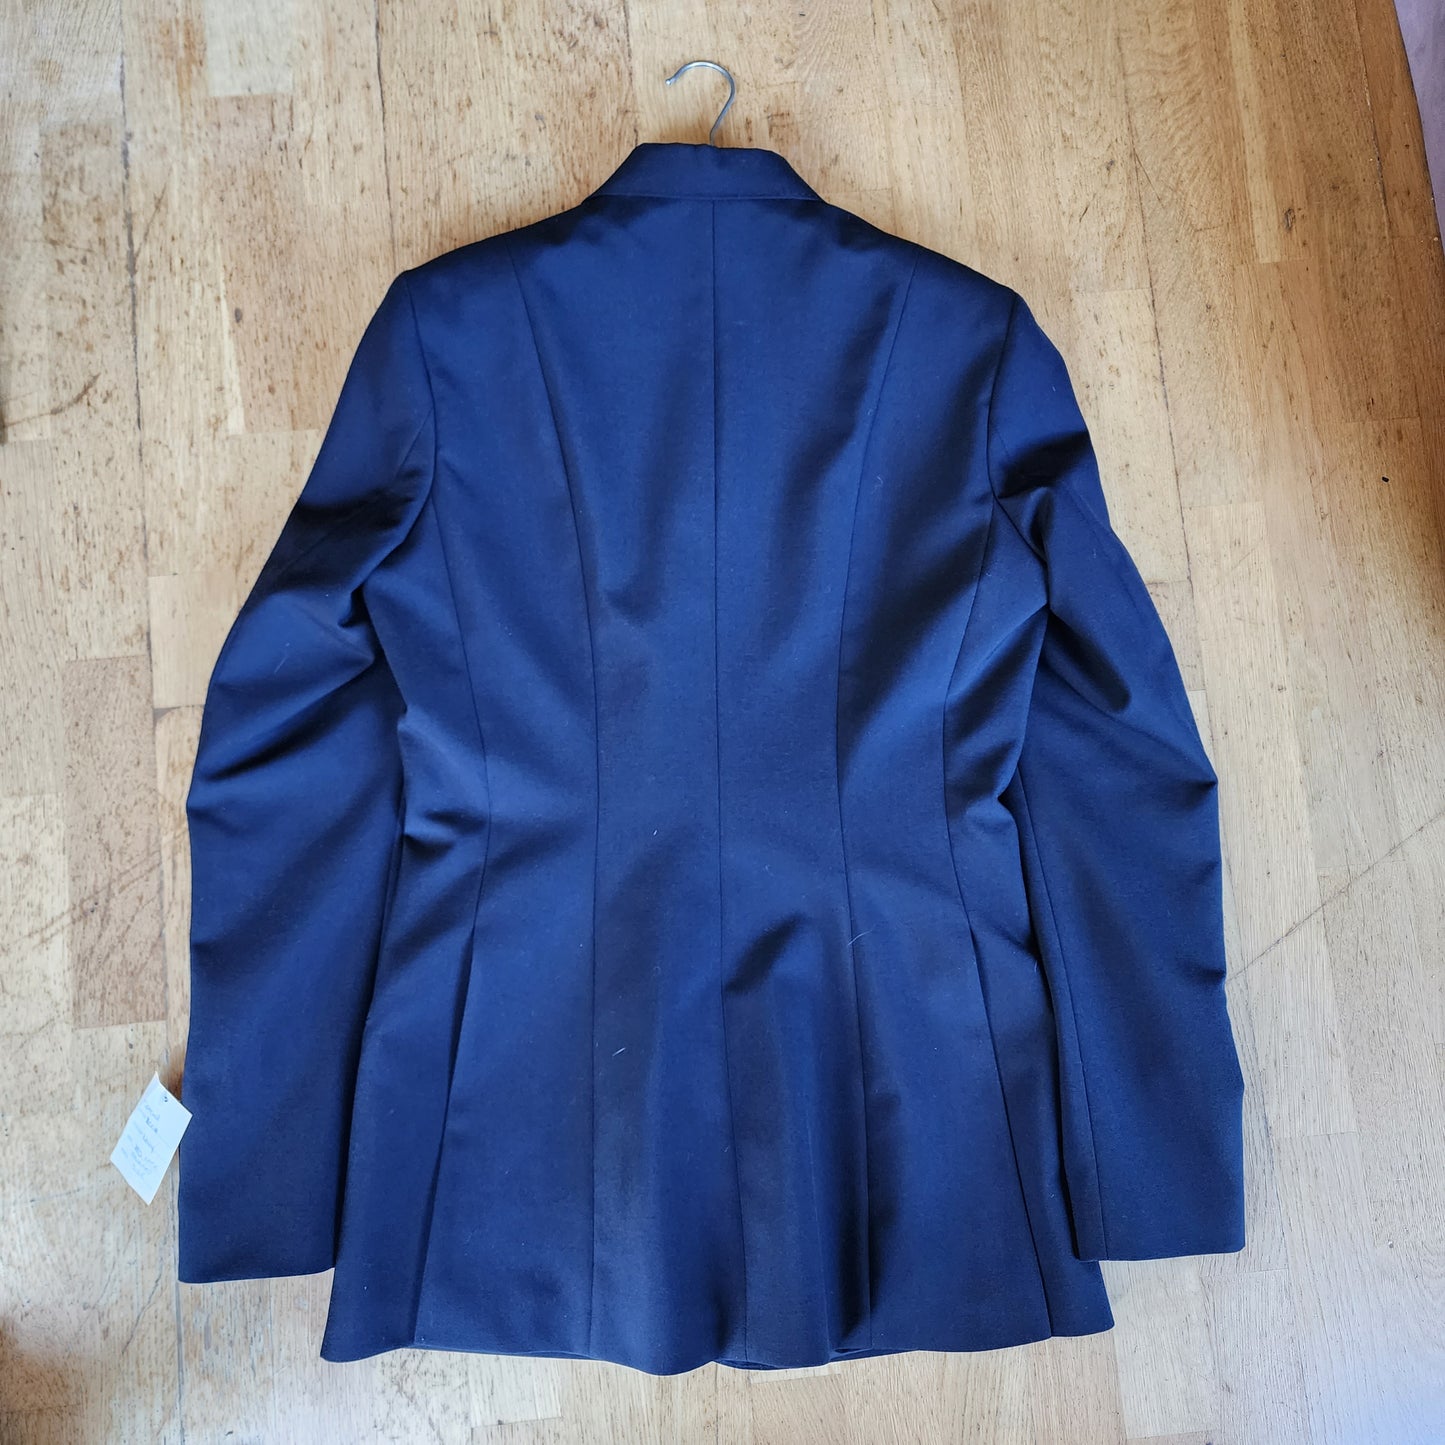 Ascott Outfitters ladies navy wool show jacket with velvet collar ladies size 16/18